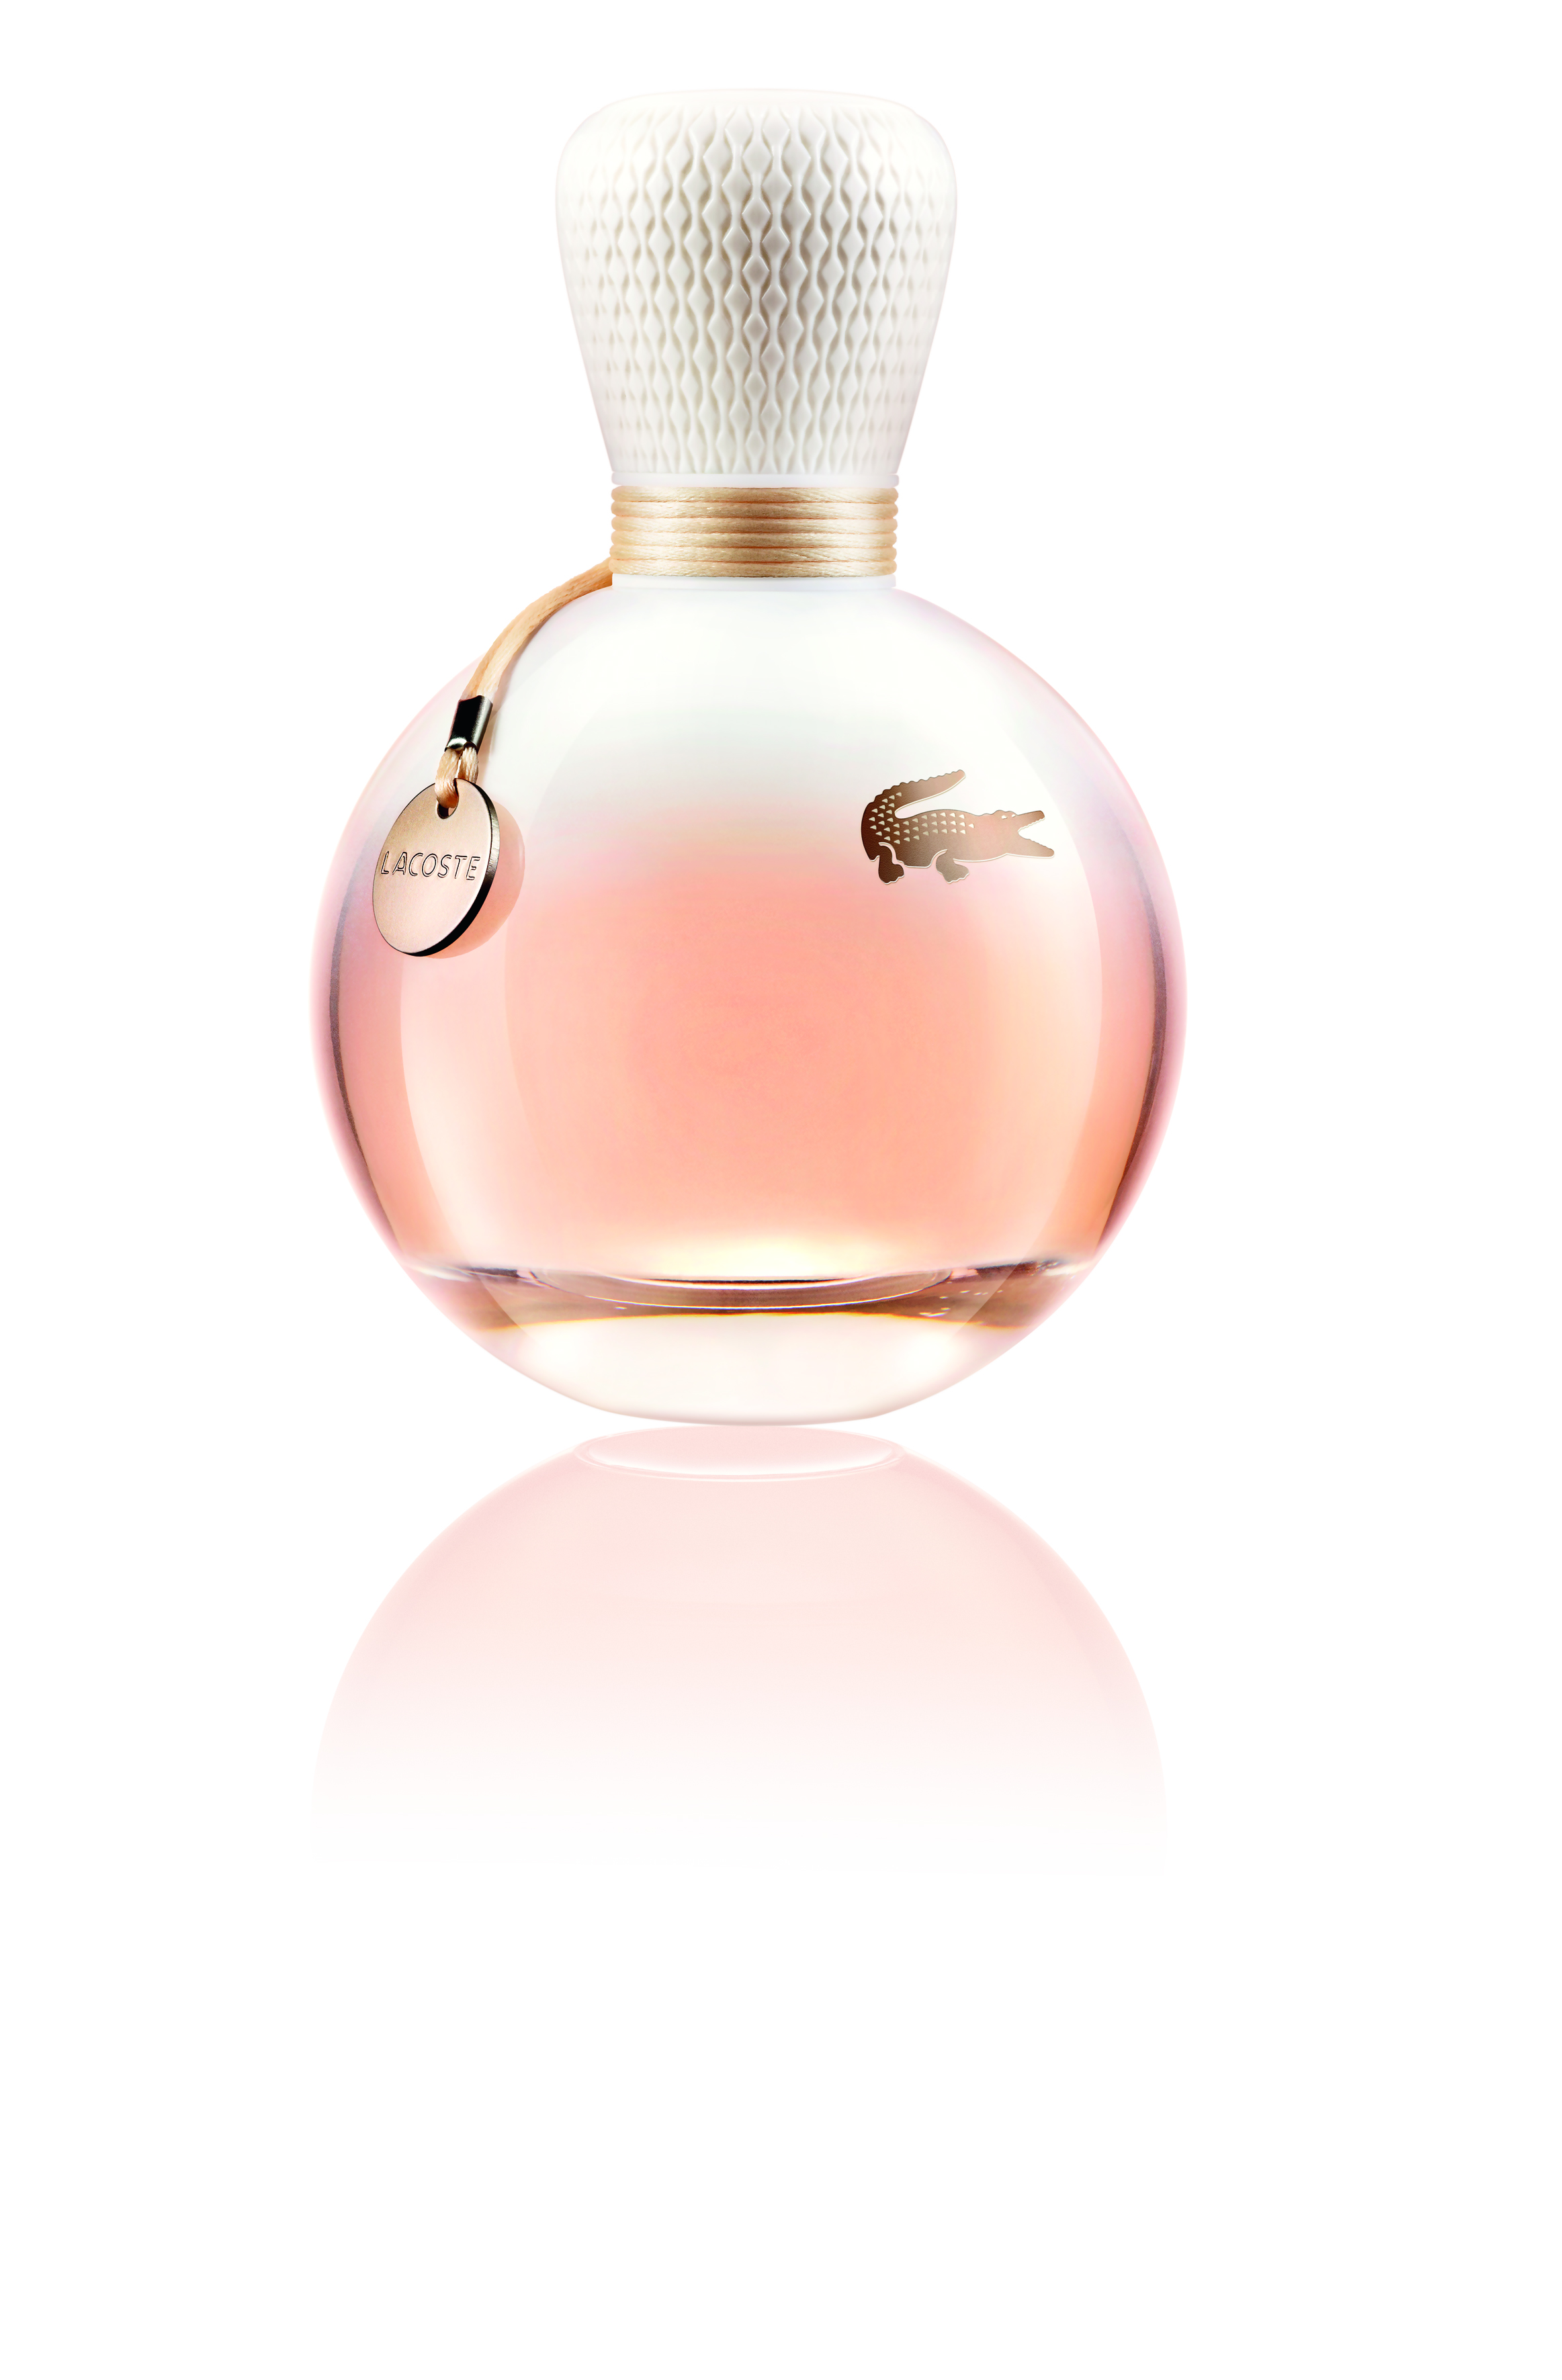 UPDATED WINNERS - COMPETITION: Lacoste Pour Femme.